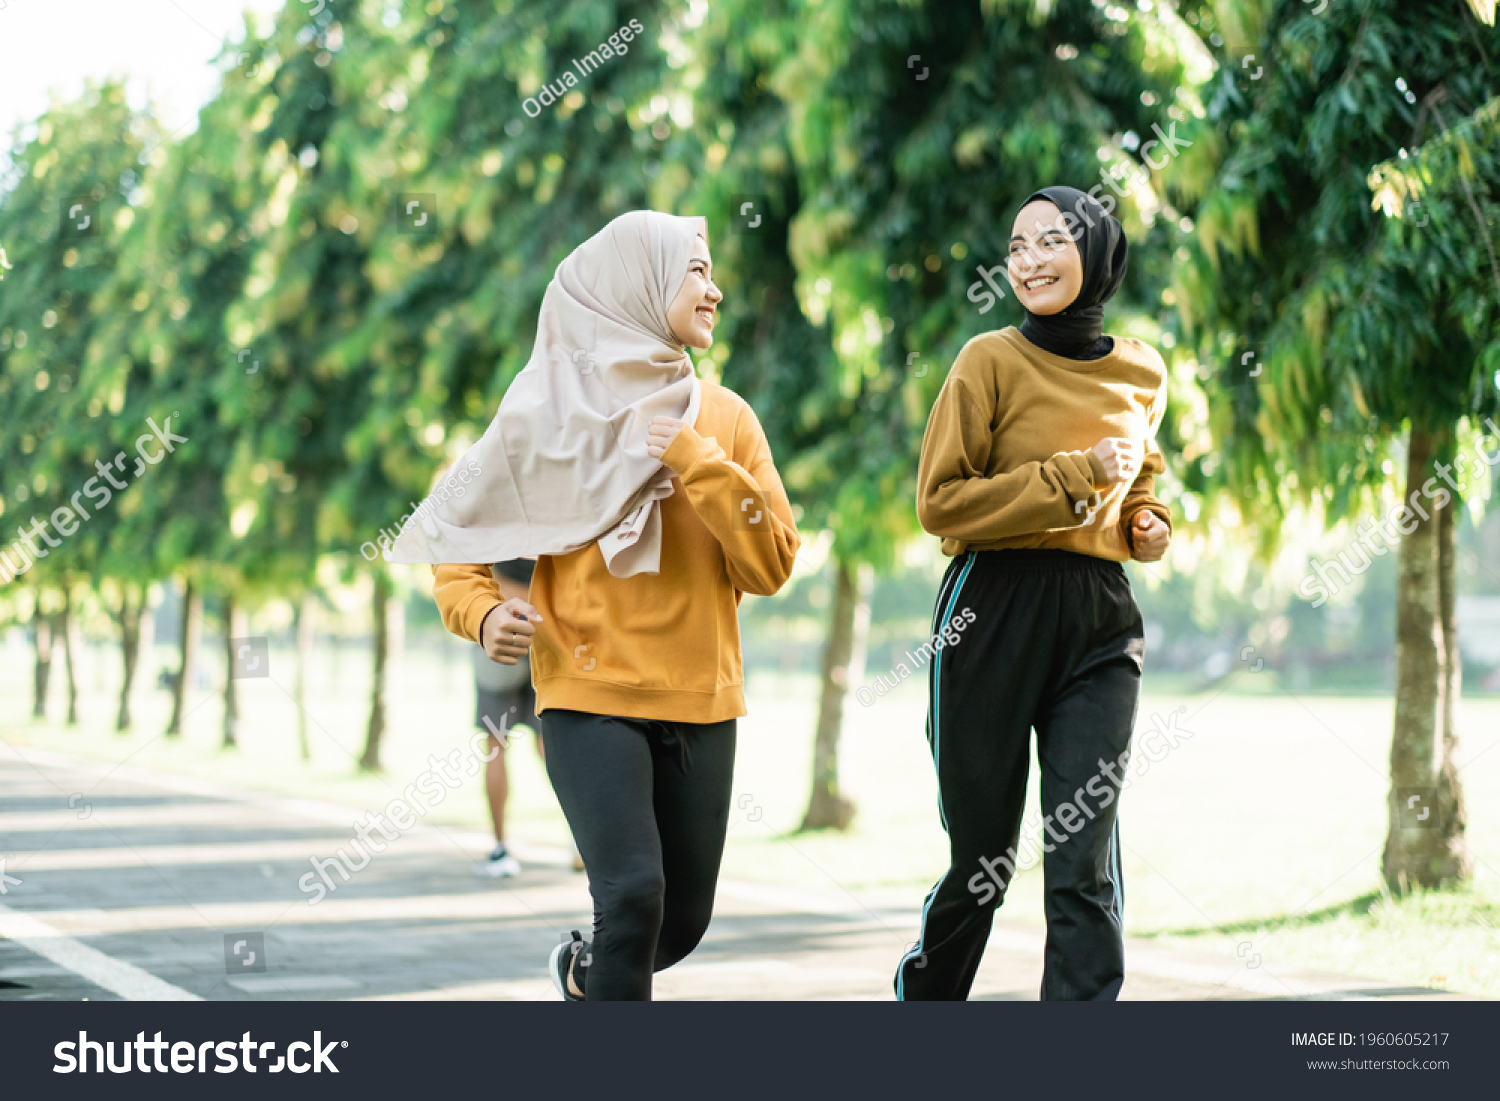 two asian muslim girls enjoy jogging together while chatting in the afternoon in the garden field #1960605217